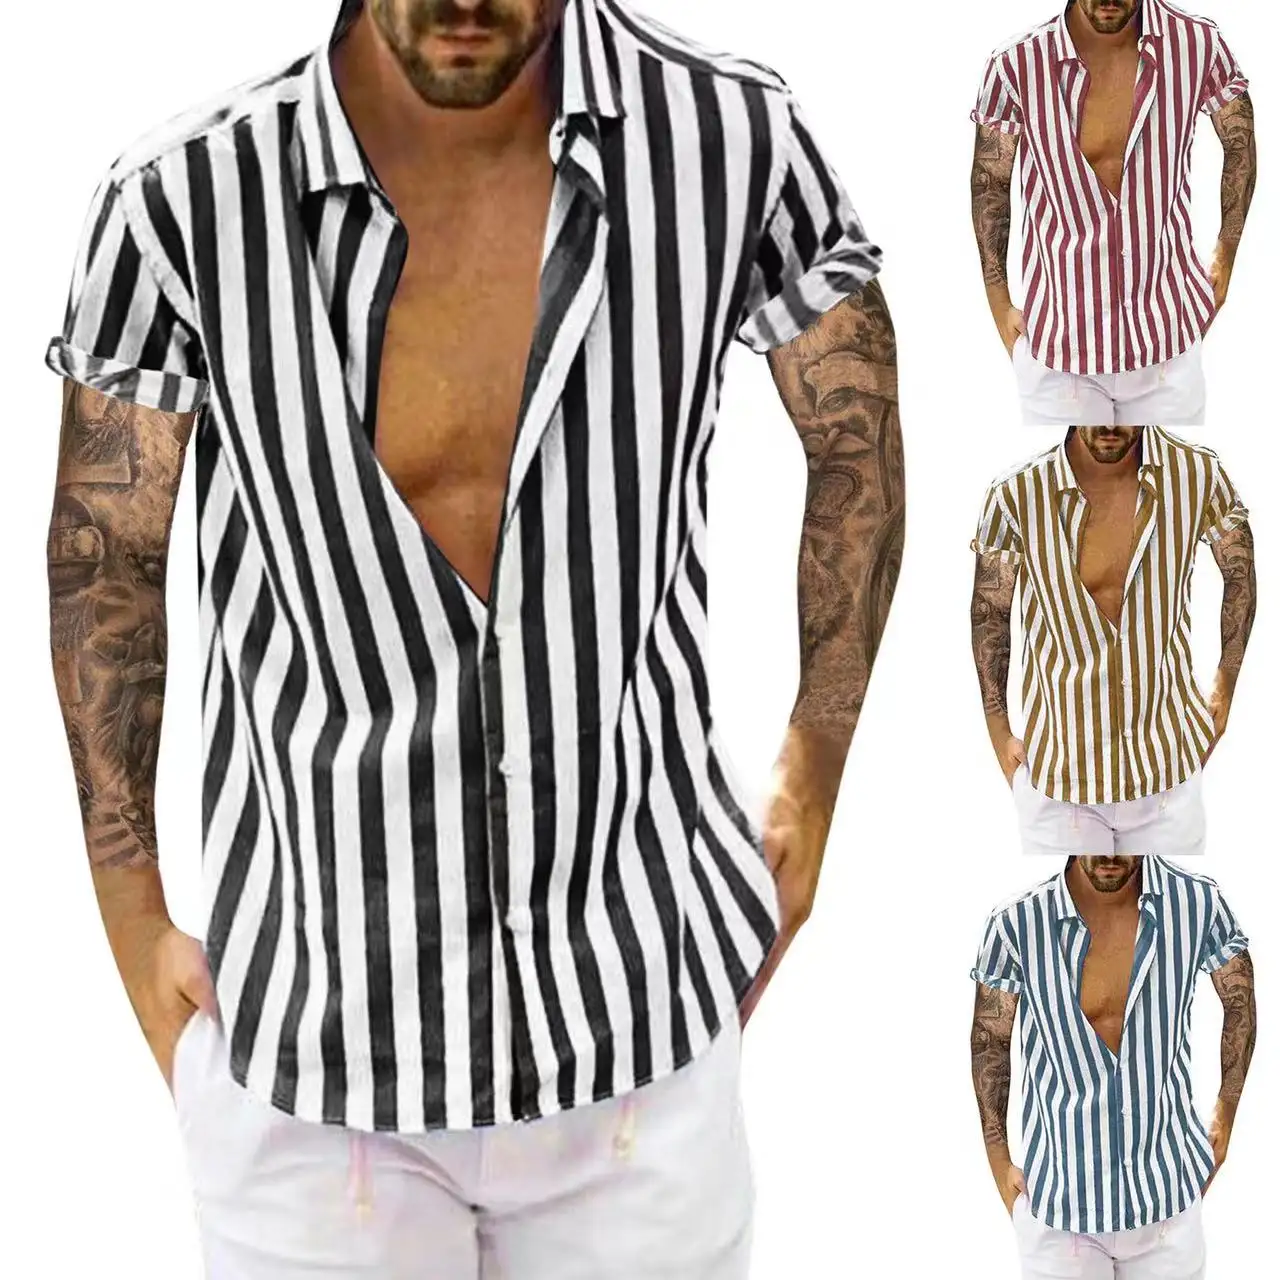 2022 foreign trade new summer men's European and American big stripe printed short-sleeved shirts fashion casual men's clothing